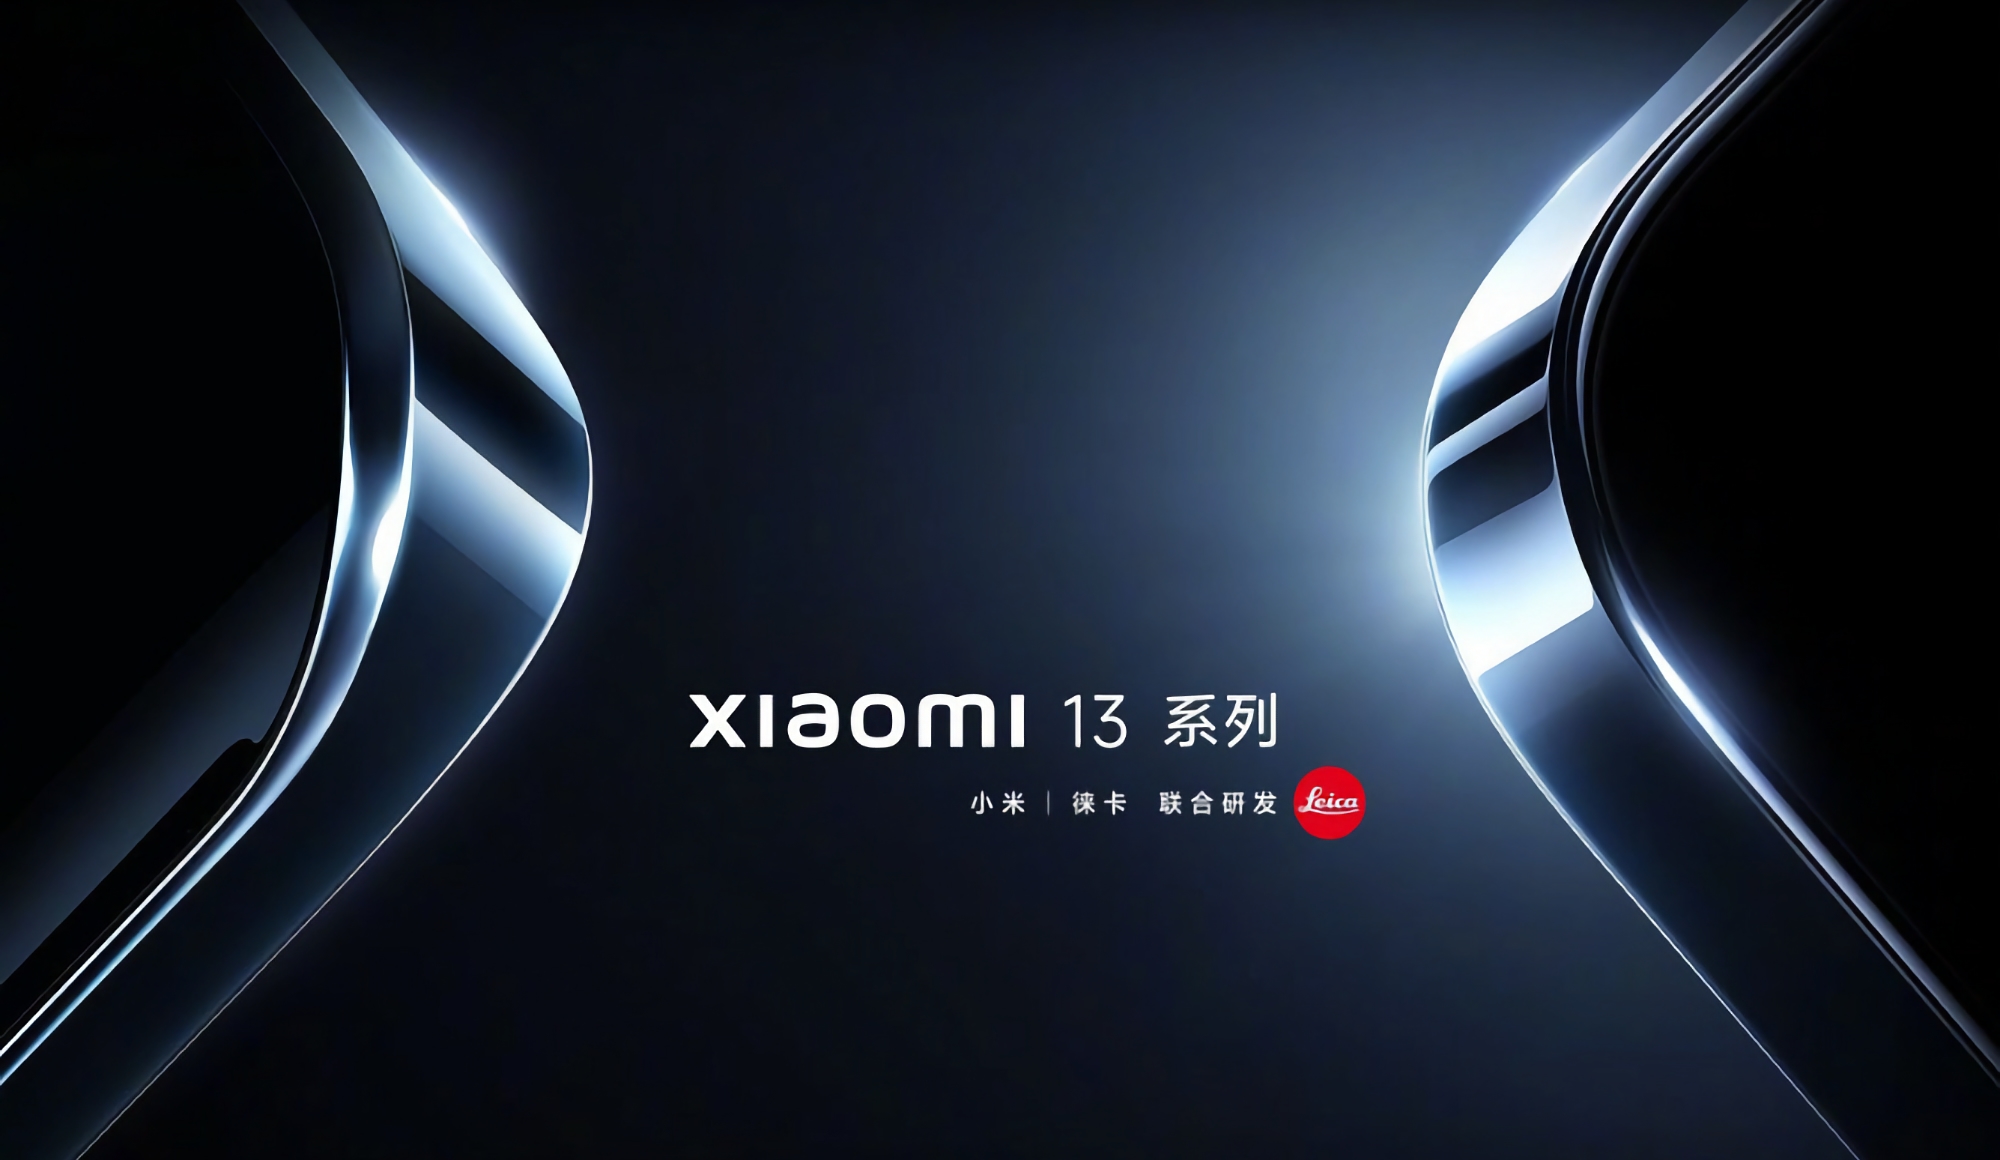 It is official: Xiaomi 13 and Xiaomi 13 Pro with OLED-displays, thin frames, IP68 protection and Leica cameras will be presented on December 1